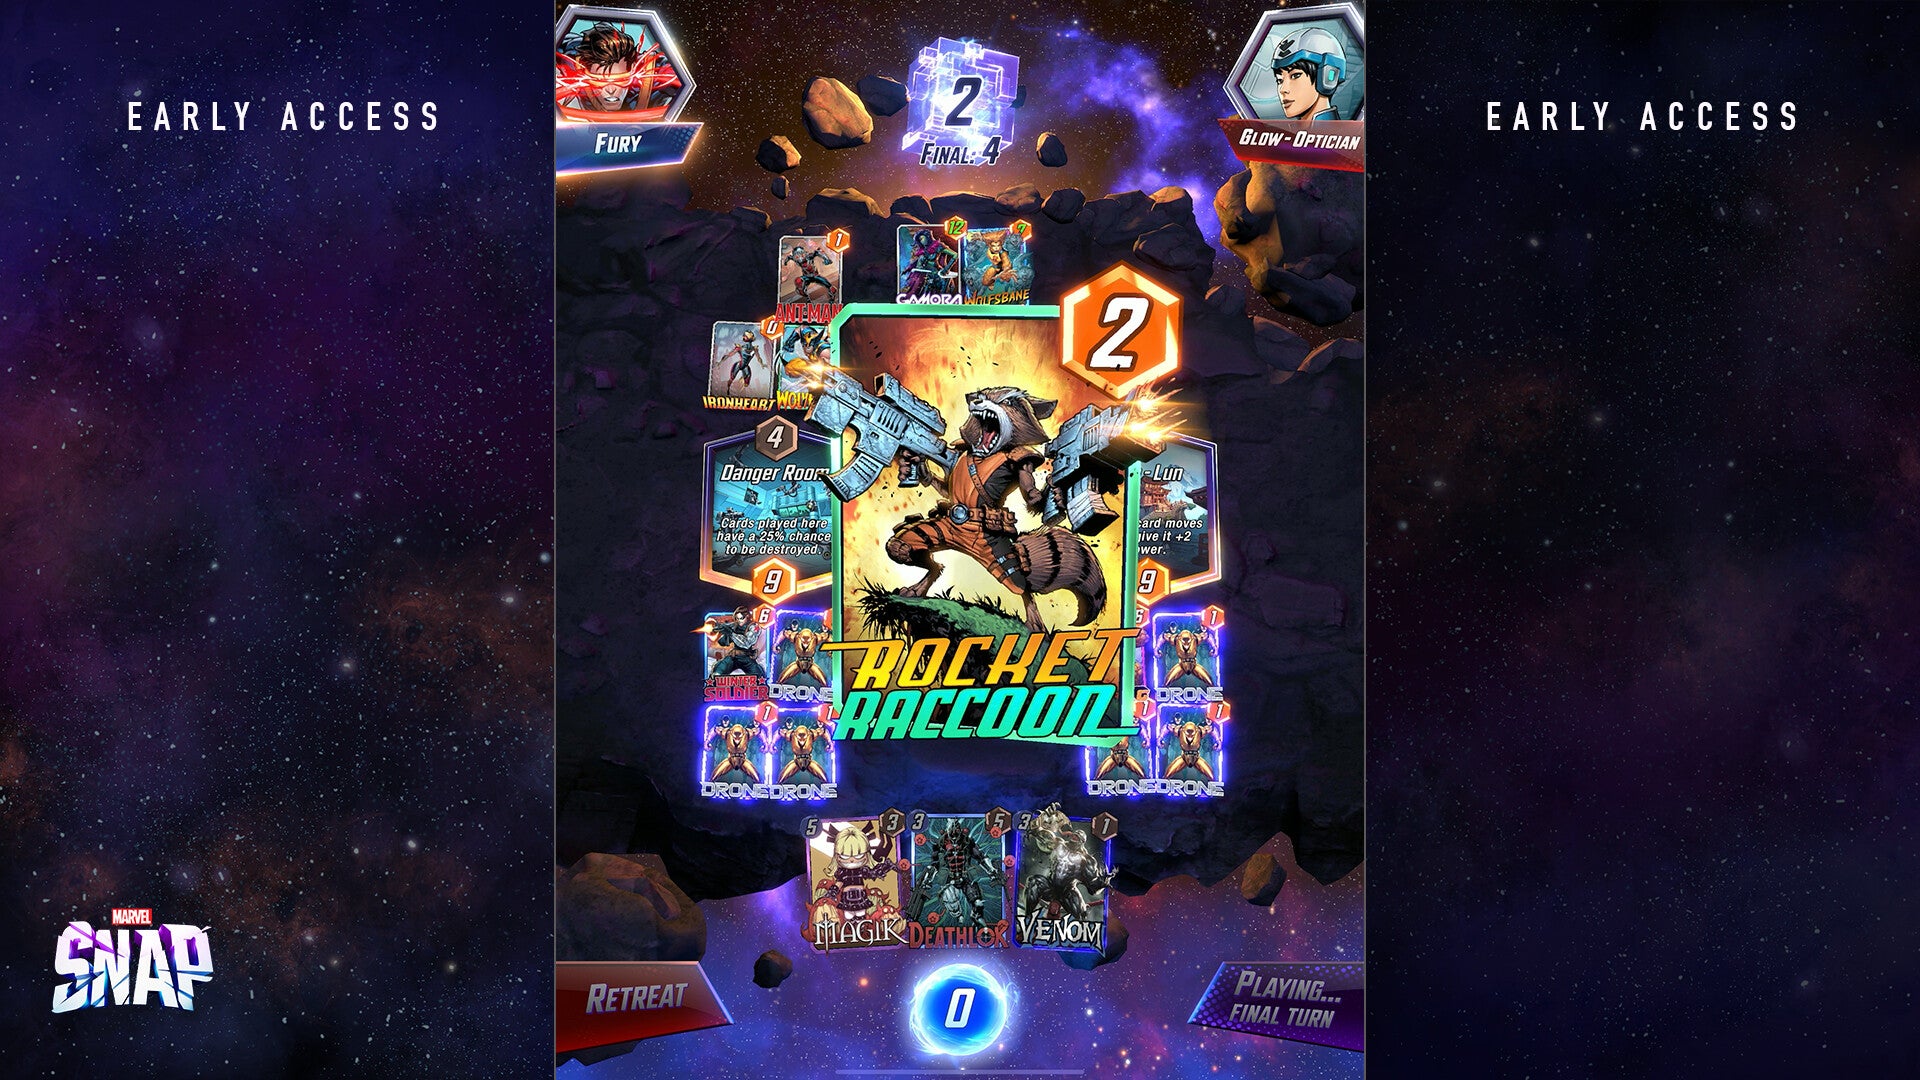 The digital card game Marvel Snap. A Rocket Raccoon card dominates the screen here. It's bright and colourful.